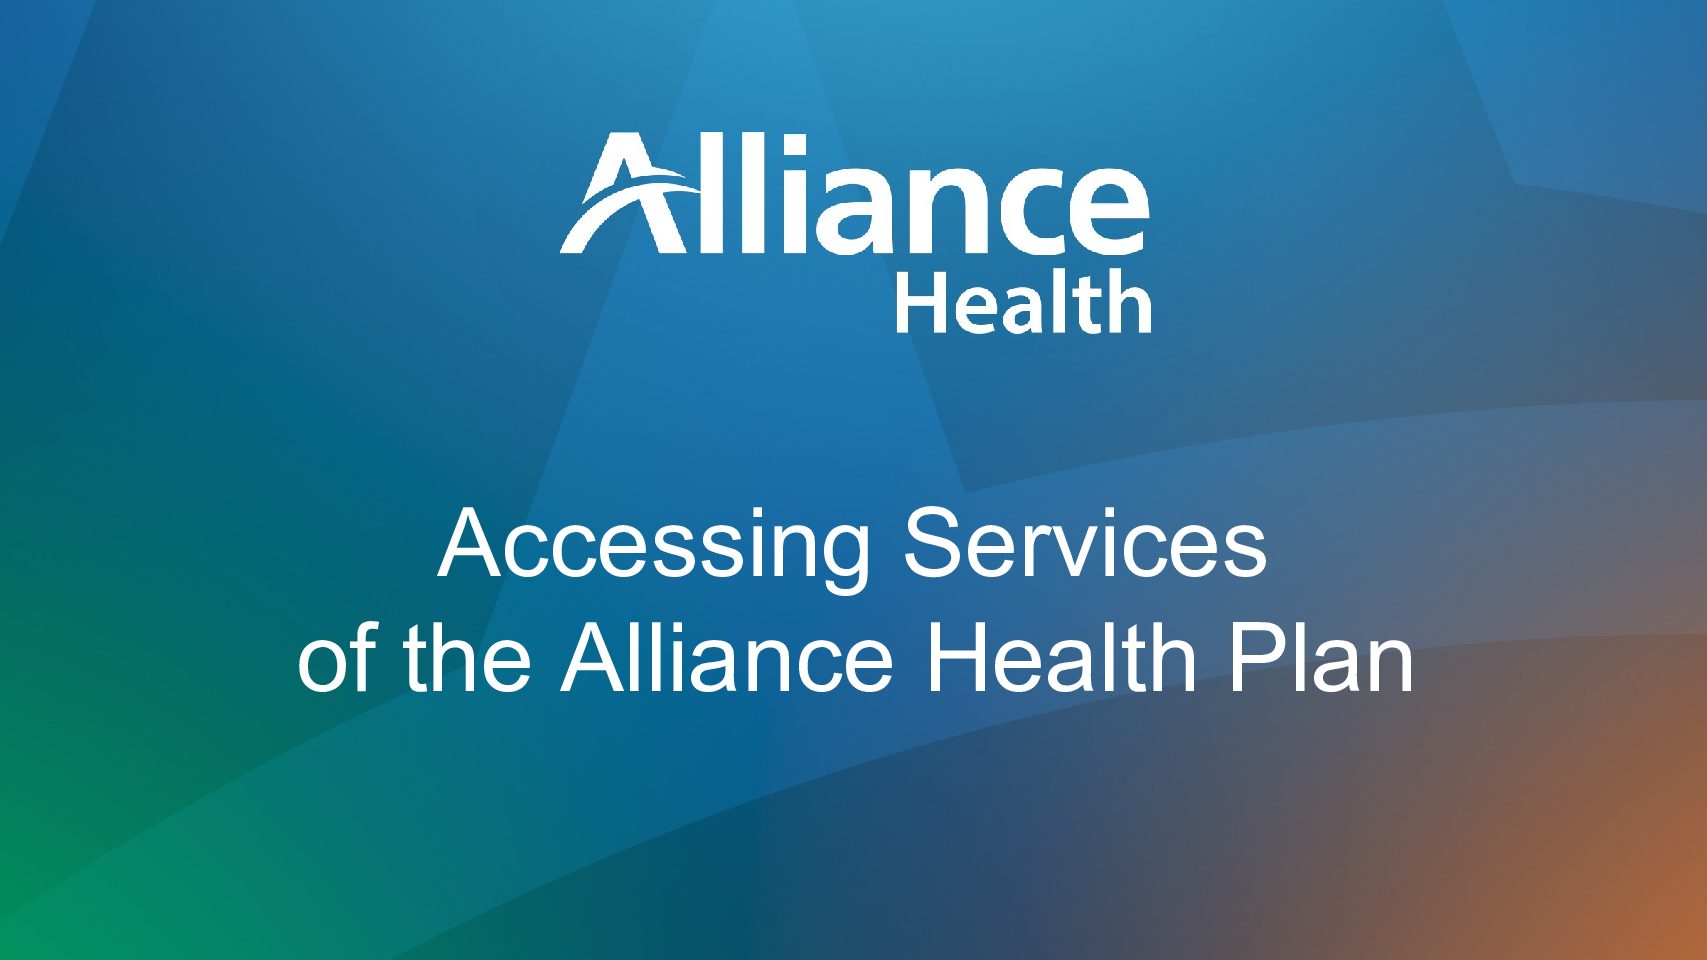 Accessing Services of the Alliance Health Plan